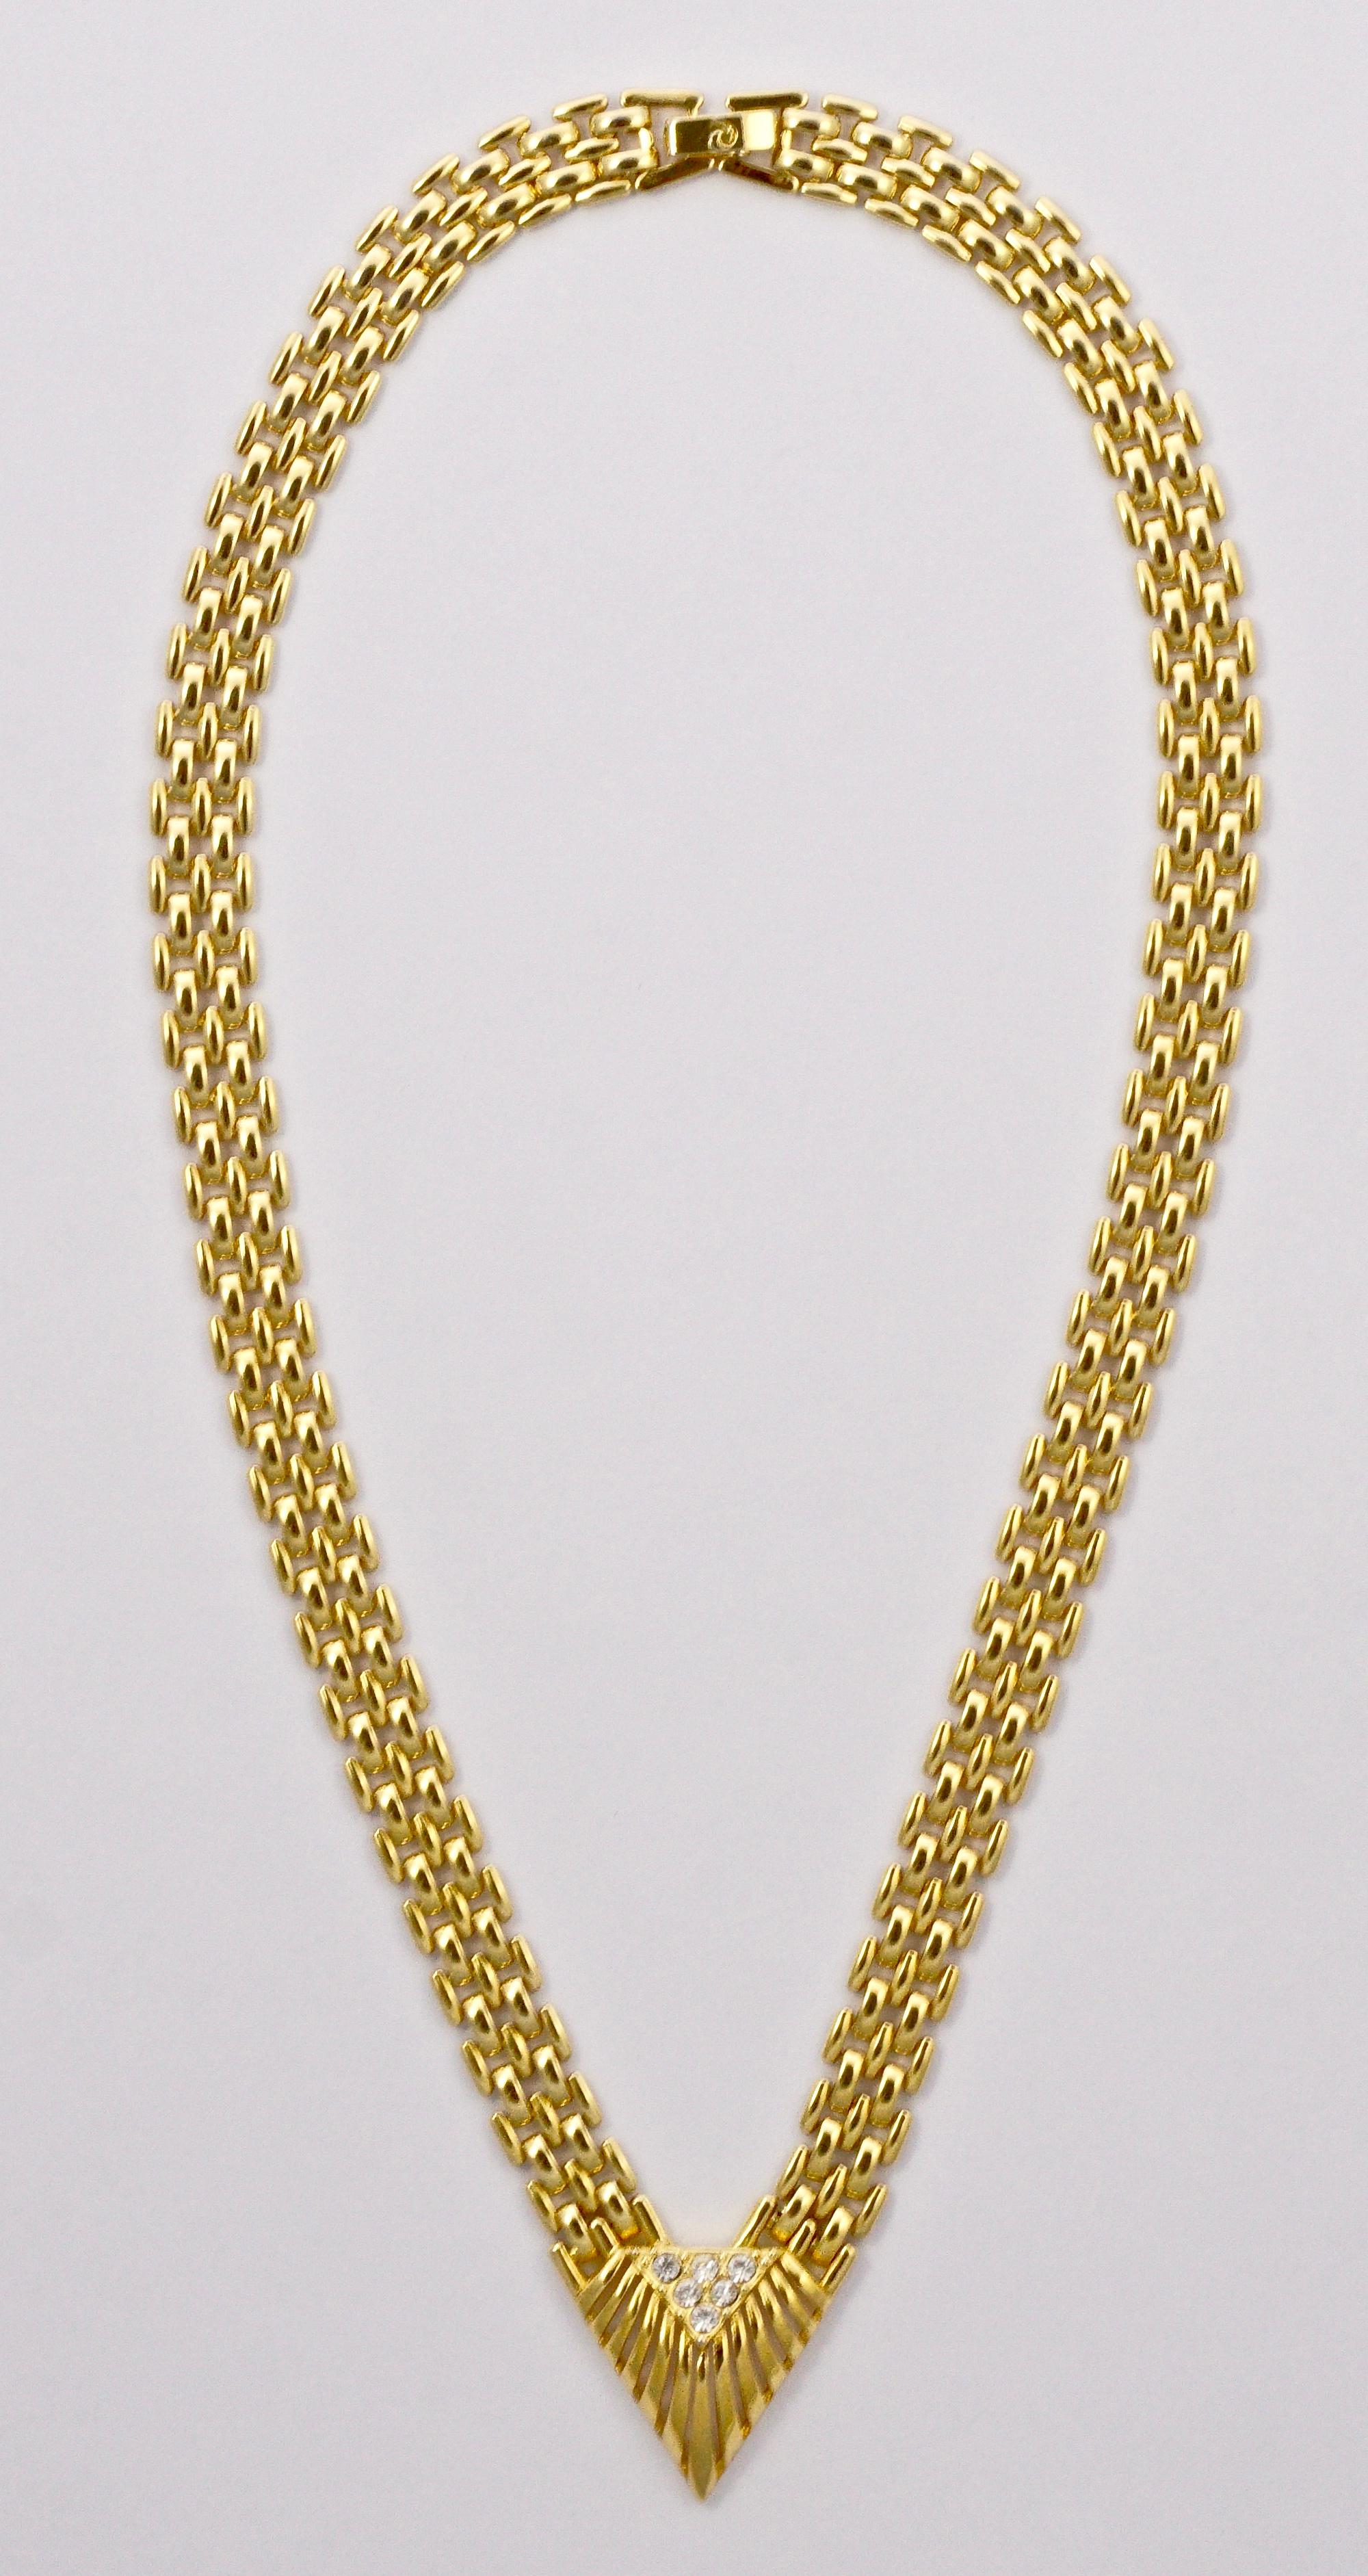 Stylish Pierre Cardin Art Deco inspired gold plated necklace, bracelet and earrings, featuring lovely woven shiny link chain, and clear rhinestones. The bracelet is length 17.8cm / 7 inches, the necklace is length approximately 45.7cm / 18 inches,